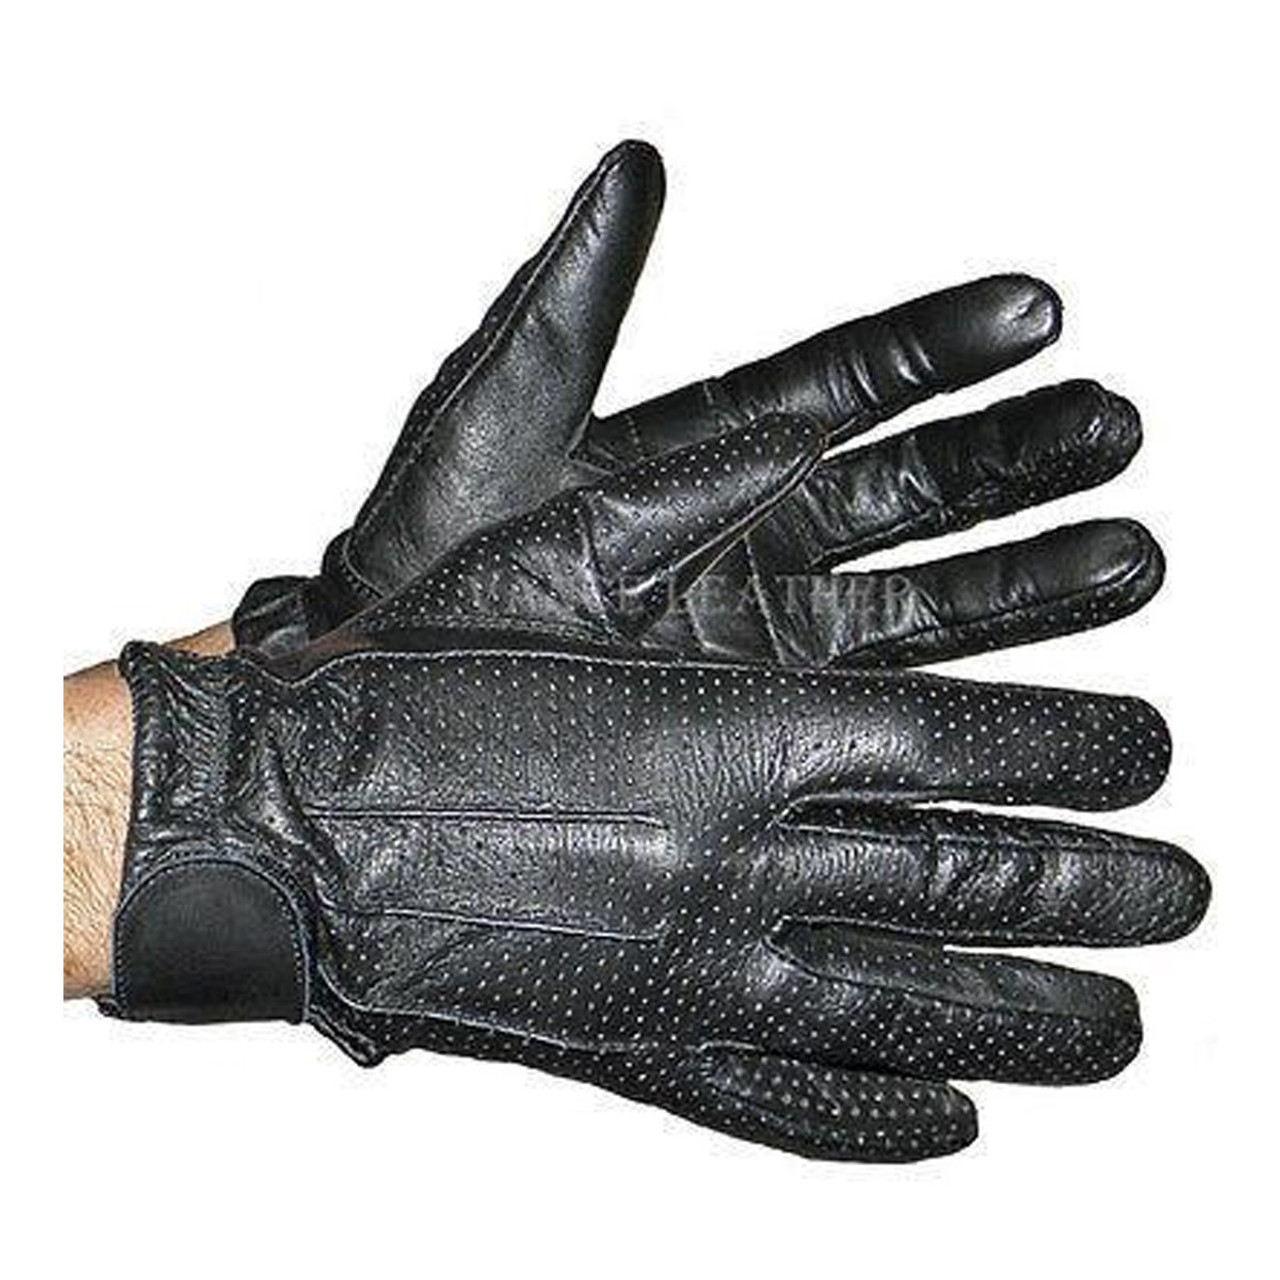 Vance Mens Black Perforated Leather Driving Gloves